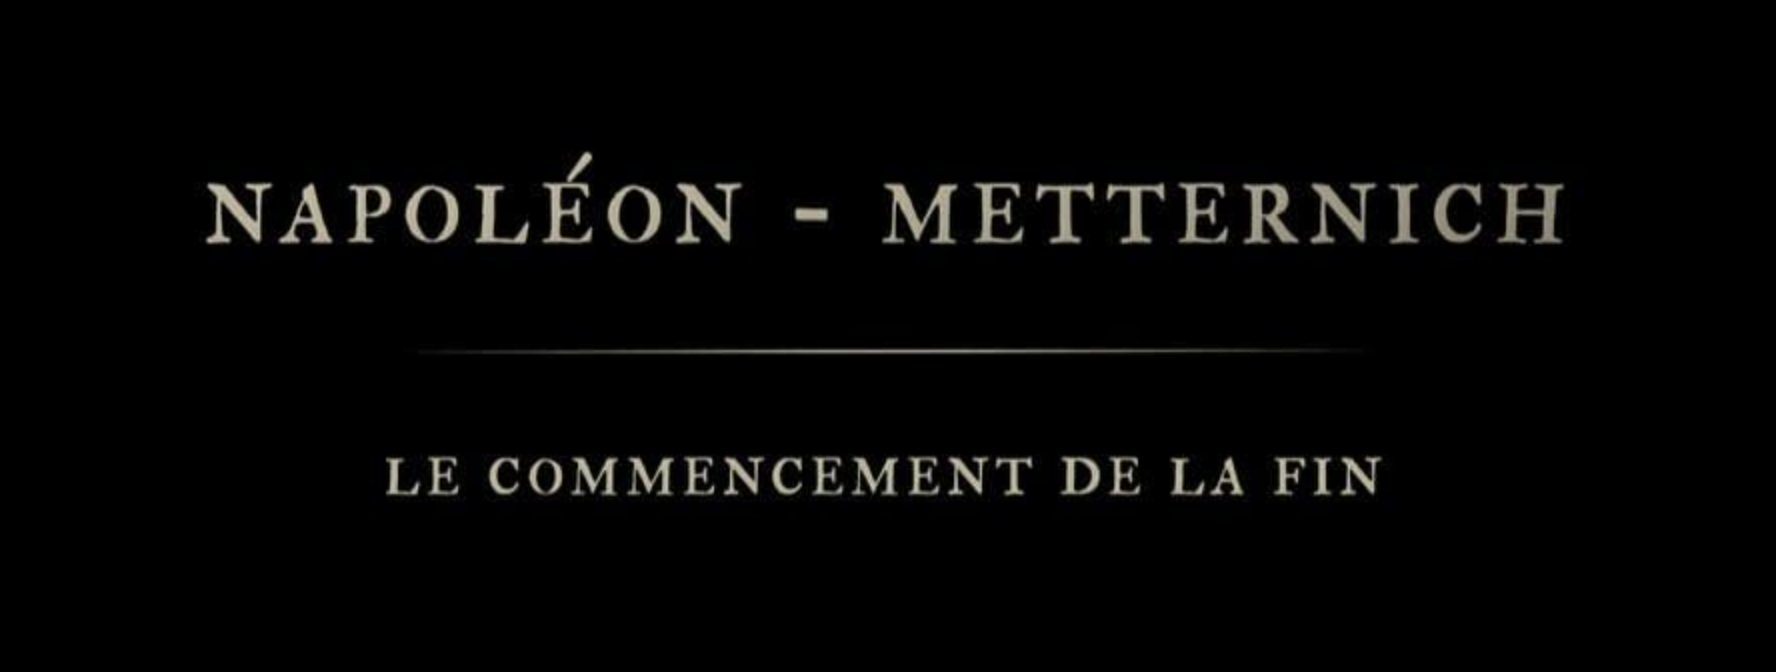 Napoleon vs Metternich: the beginning of the end